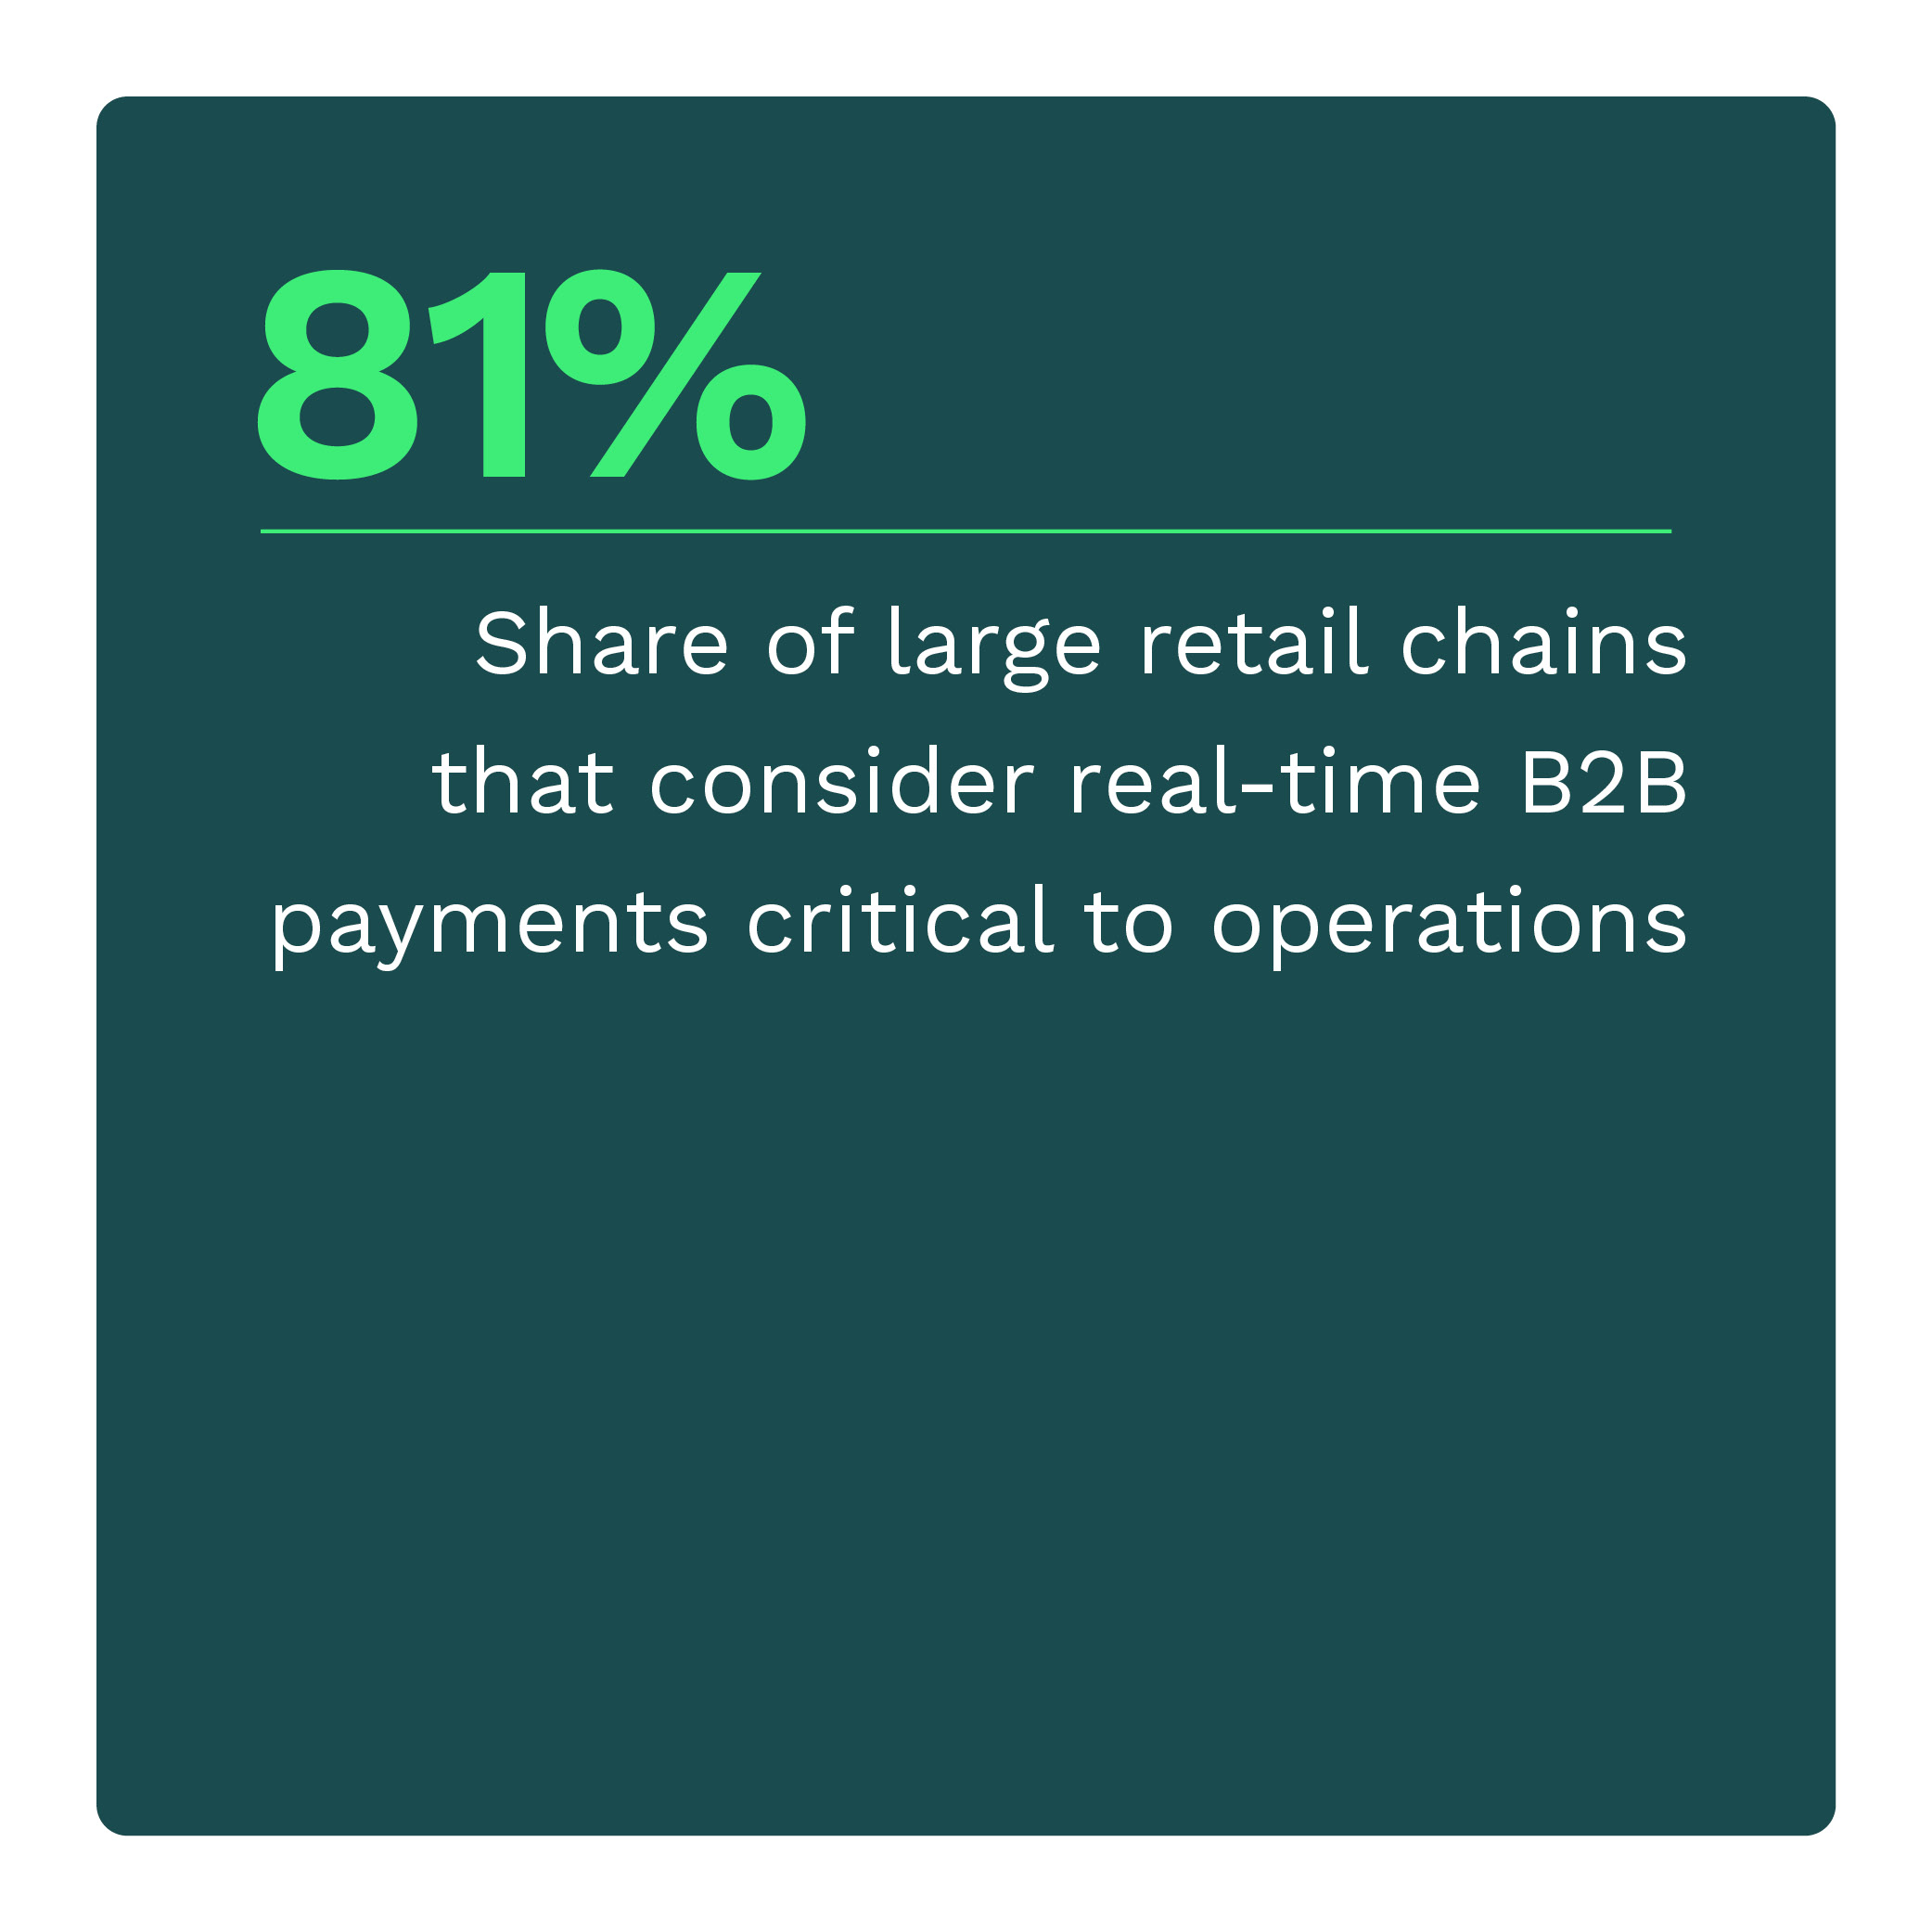 81%: Share of large retail chains that consider real-time B2B payments critical to operations